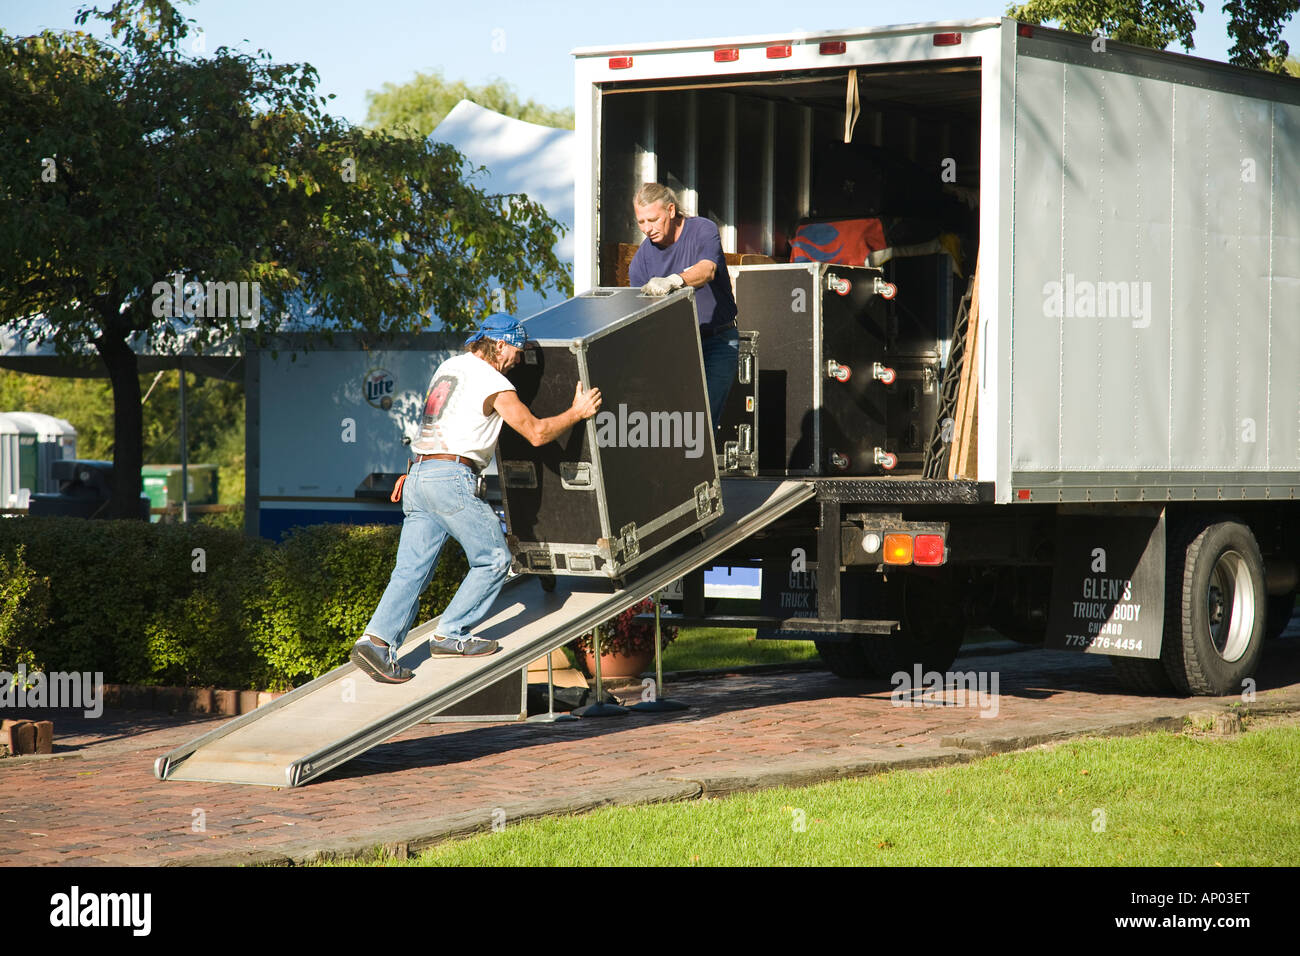 ILLINOIS Long Grove Two men unload speakers and large crates from truck using ramp Stock Photo